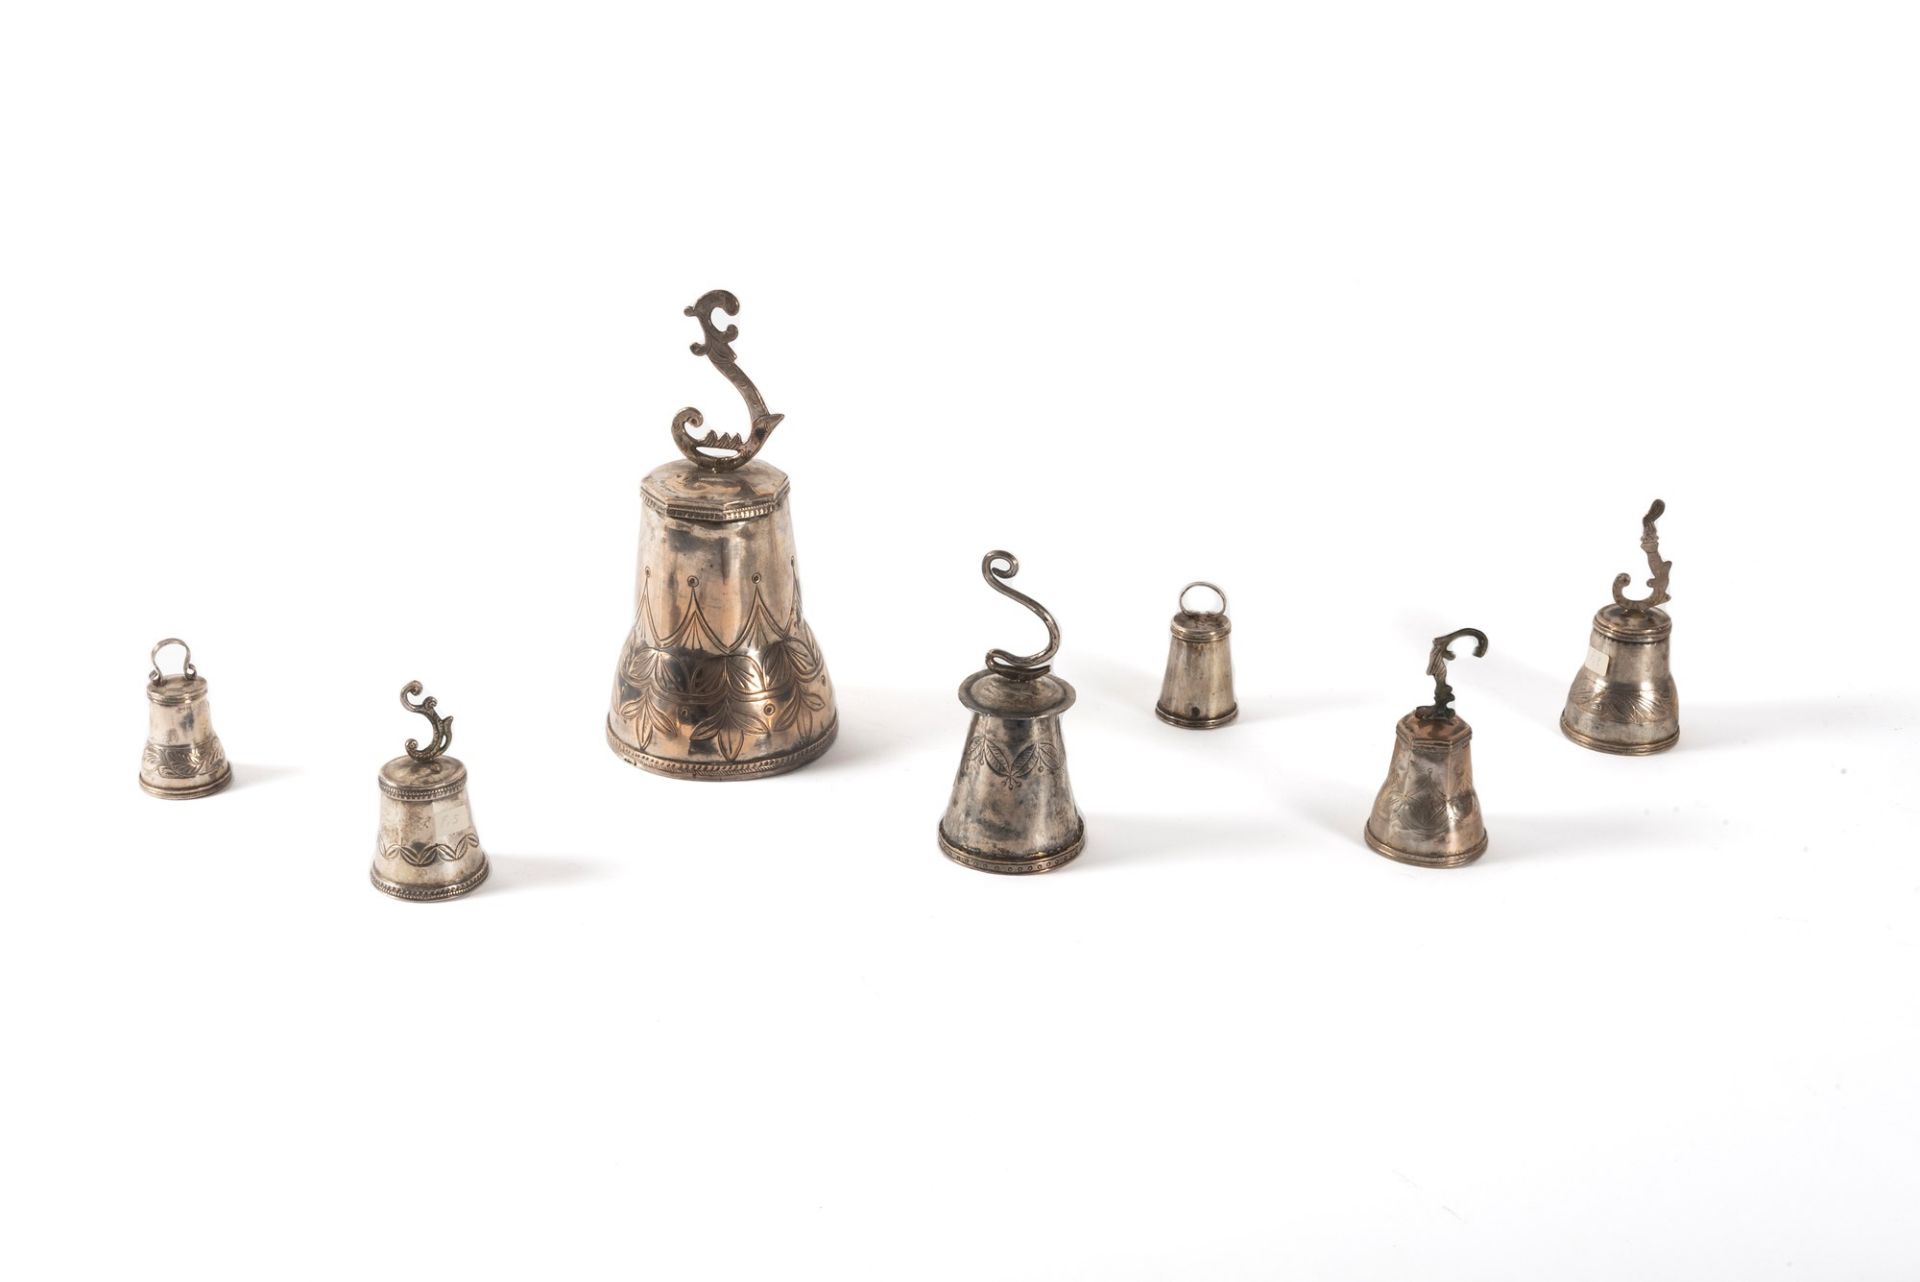 Lot consisting of seven silver-plated metal bells, 19th-20th centuries